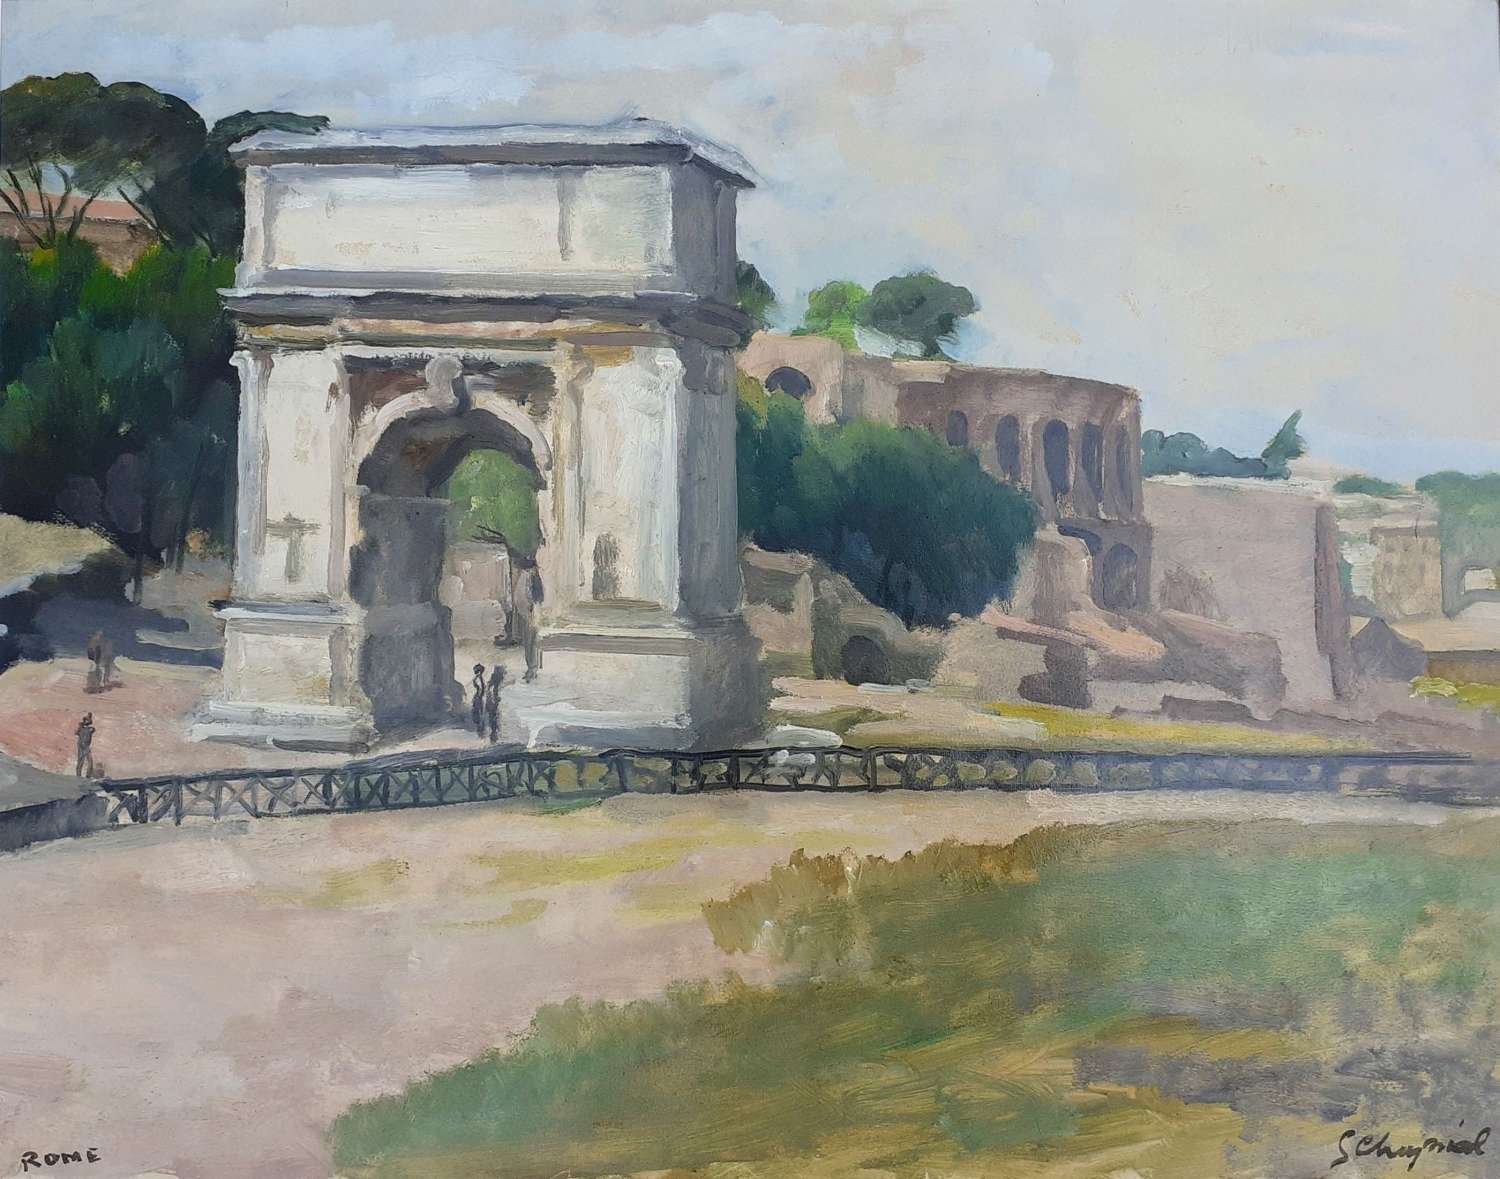 Cheyssial: Rome Colosseum And Titus Arch,1932 Art Deco Period Painting